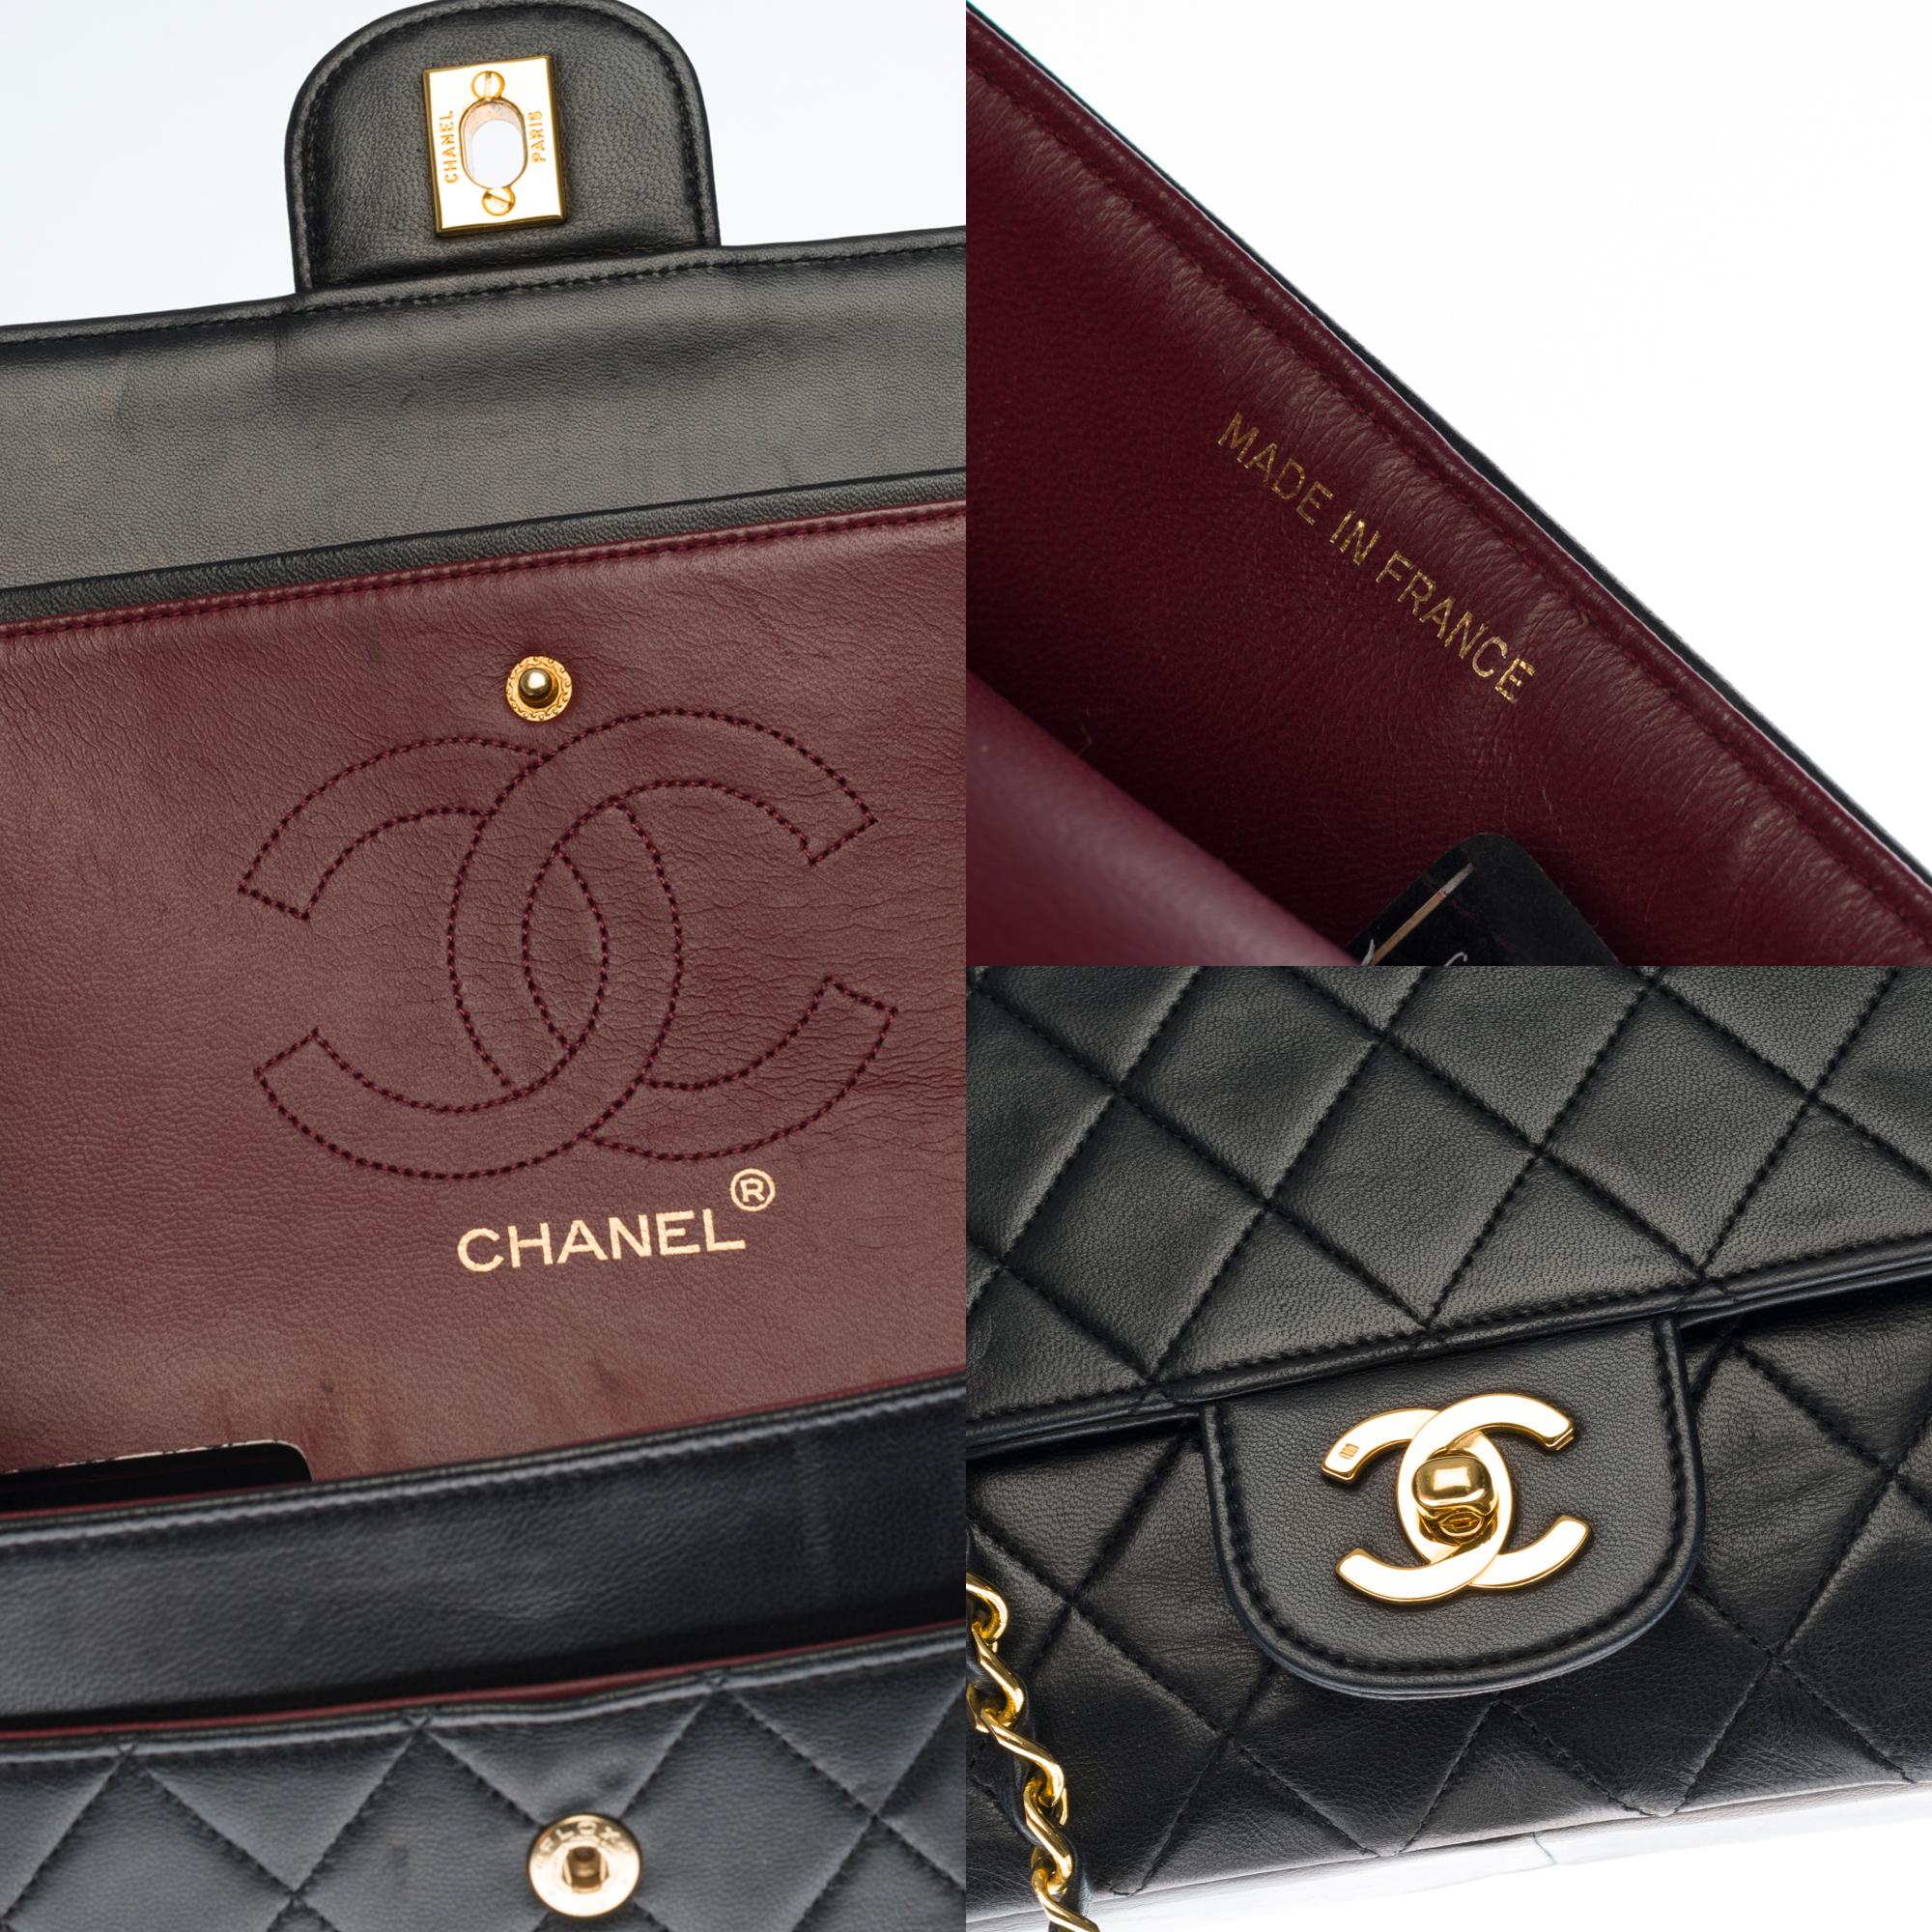 Chanel Timeless Medium double flap shoulder bag in black quilted lambskin, GHW 1